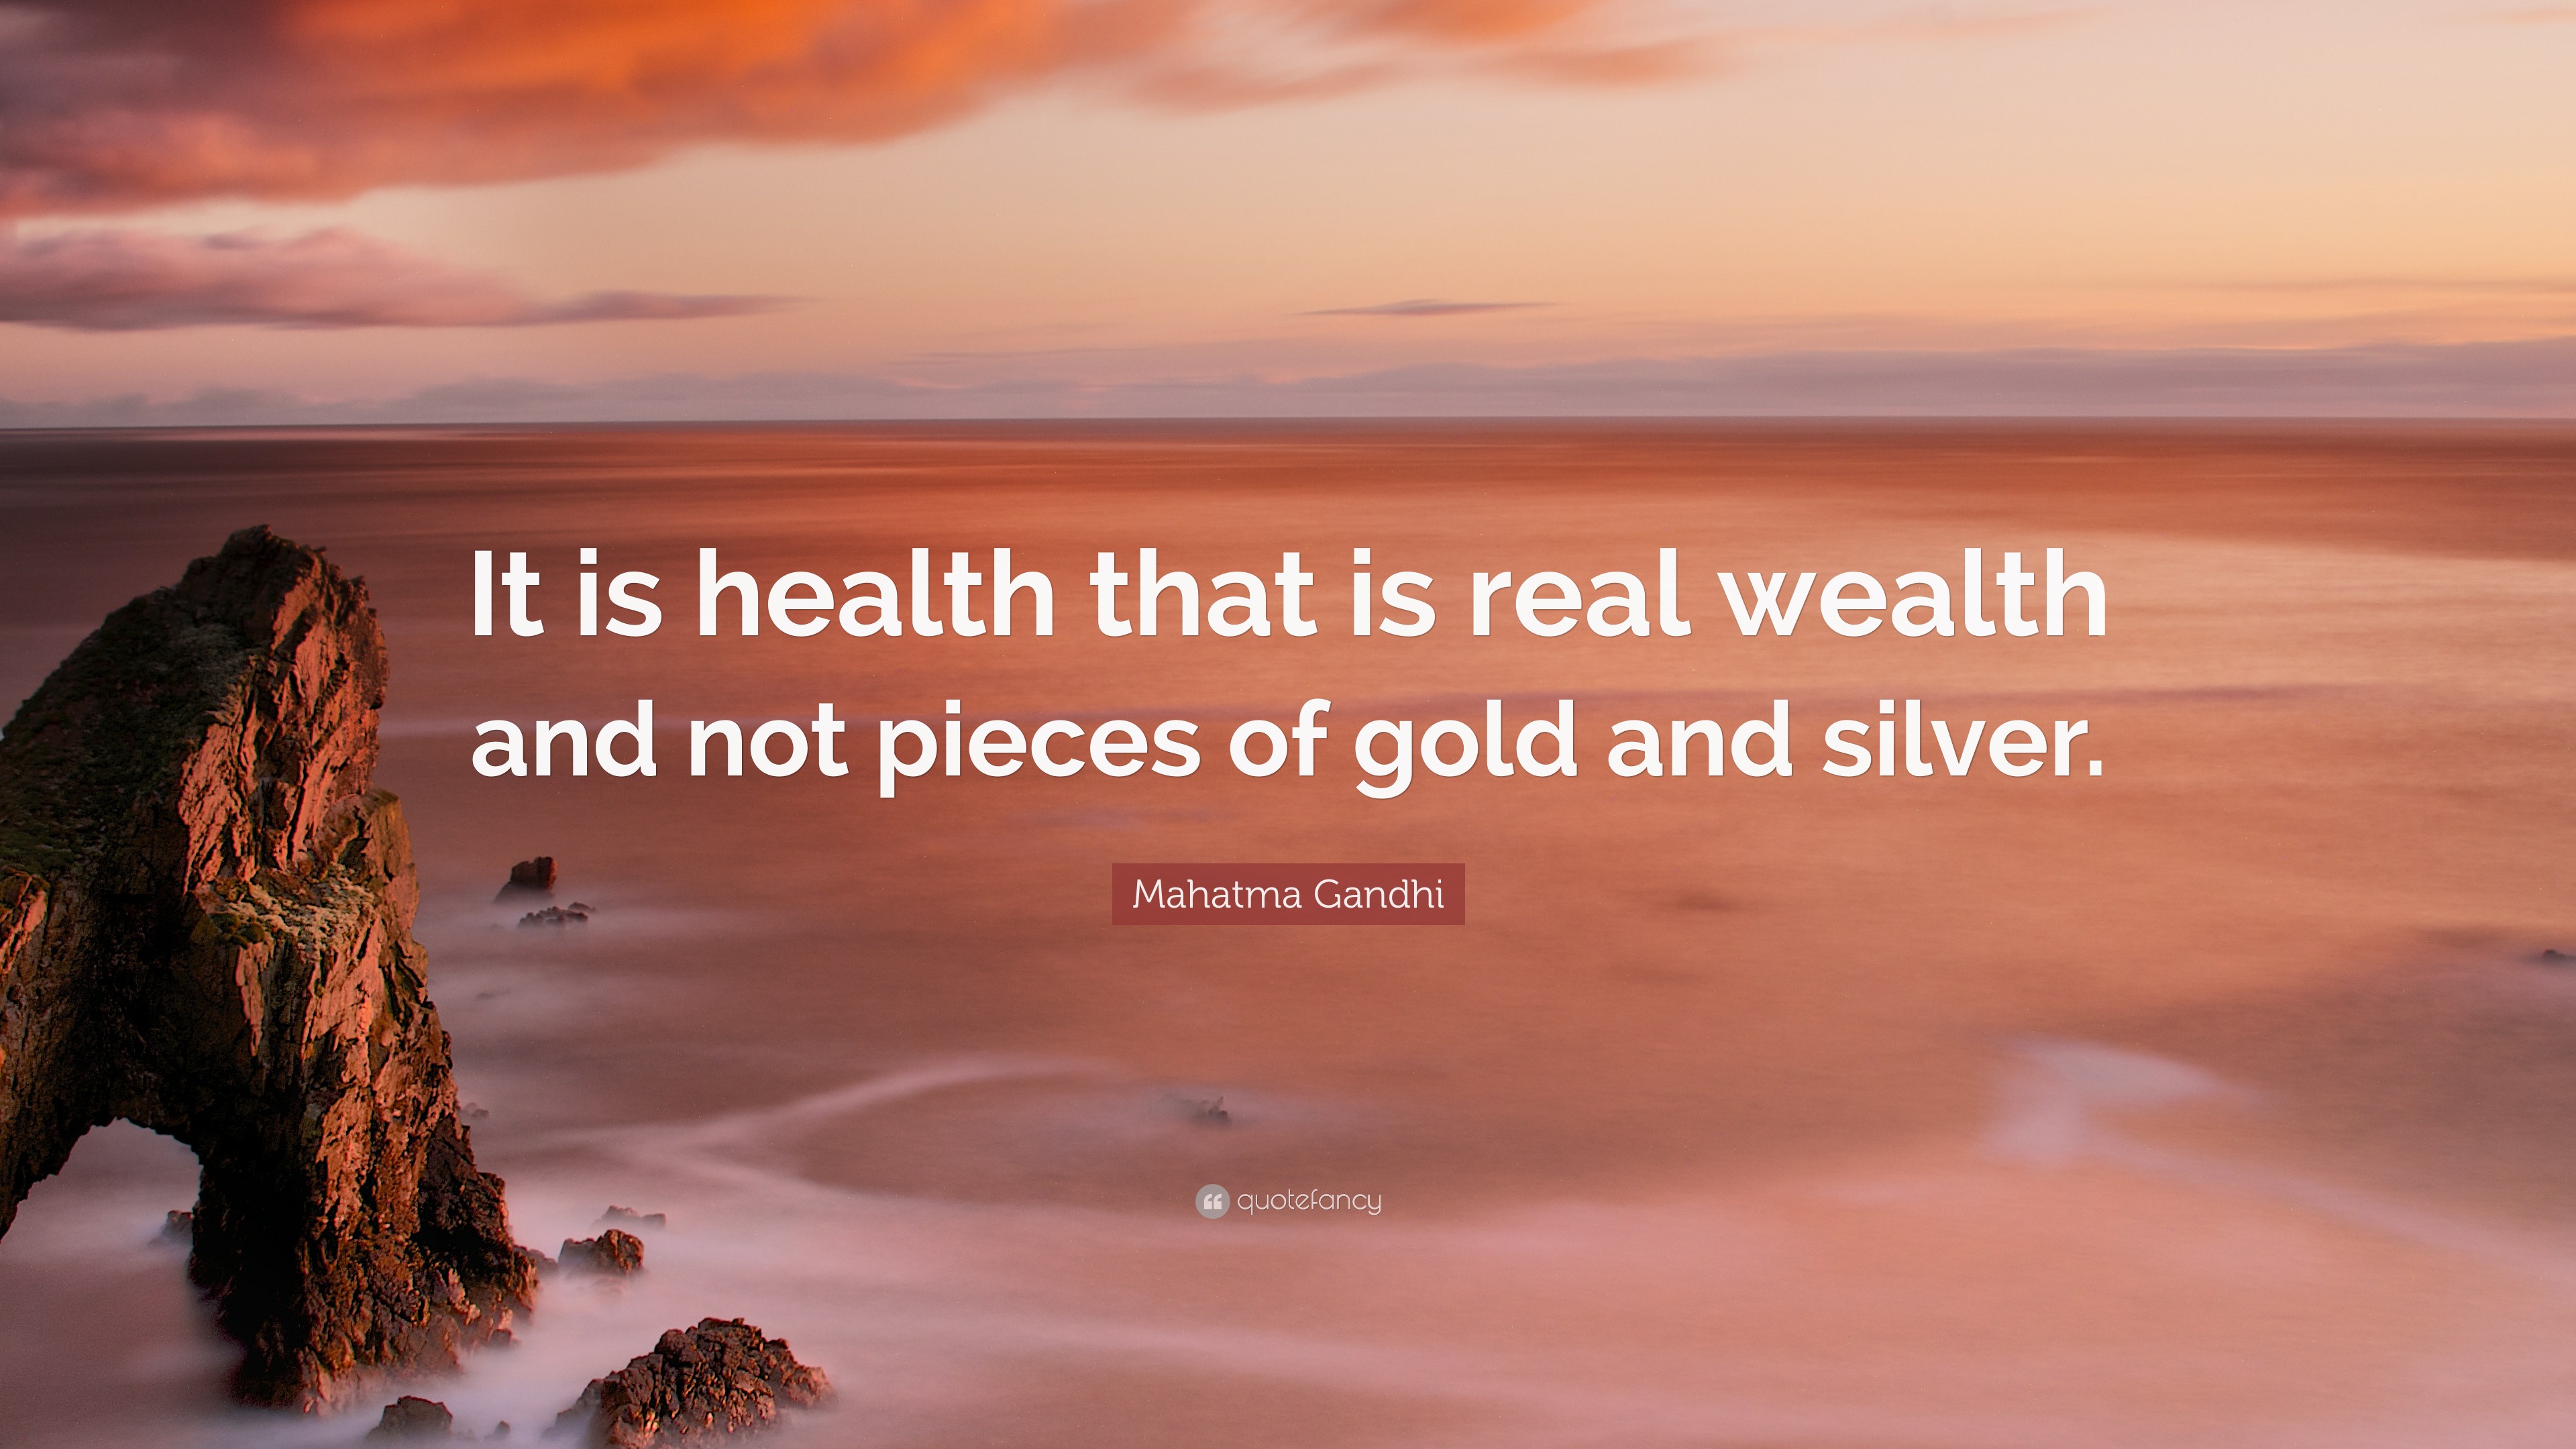 Mahatma Gandhi Quote: “It is health that is real wealth and not pieces